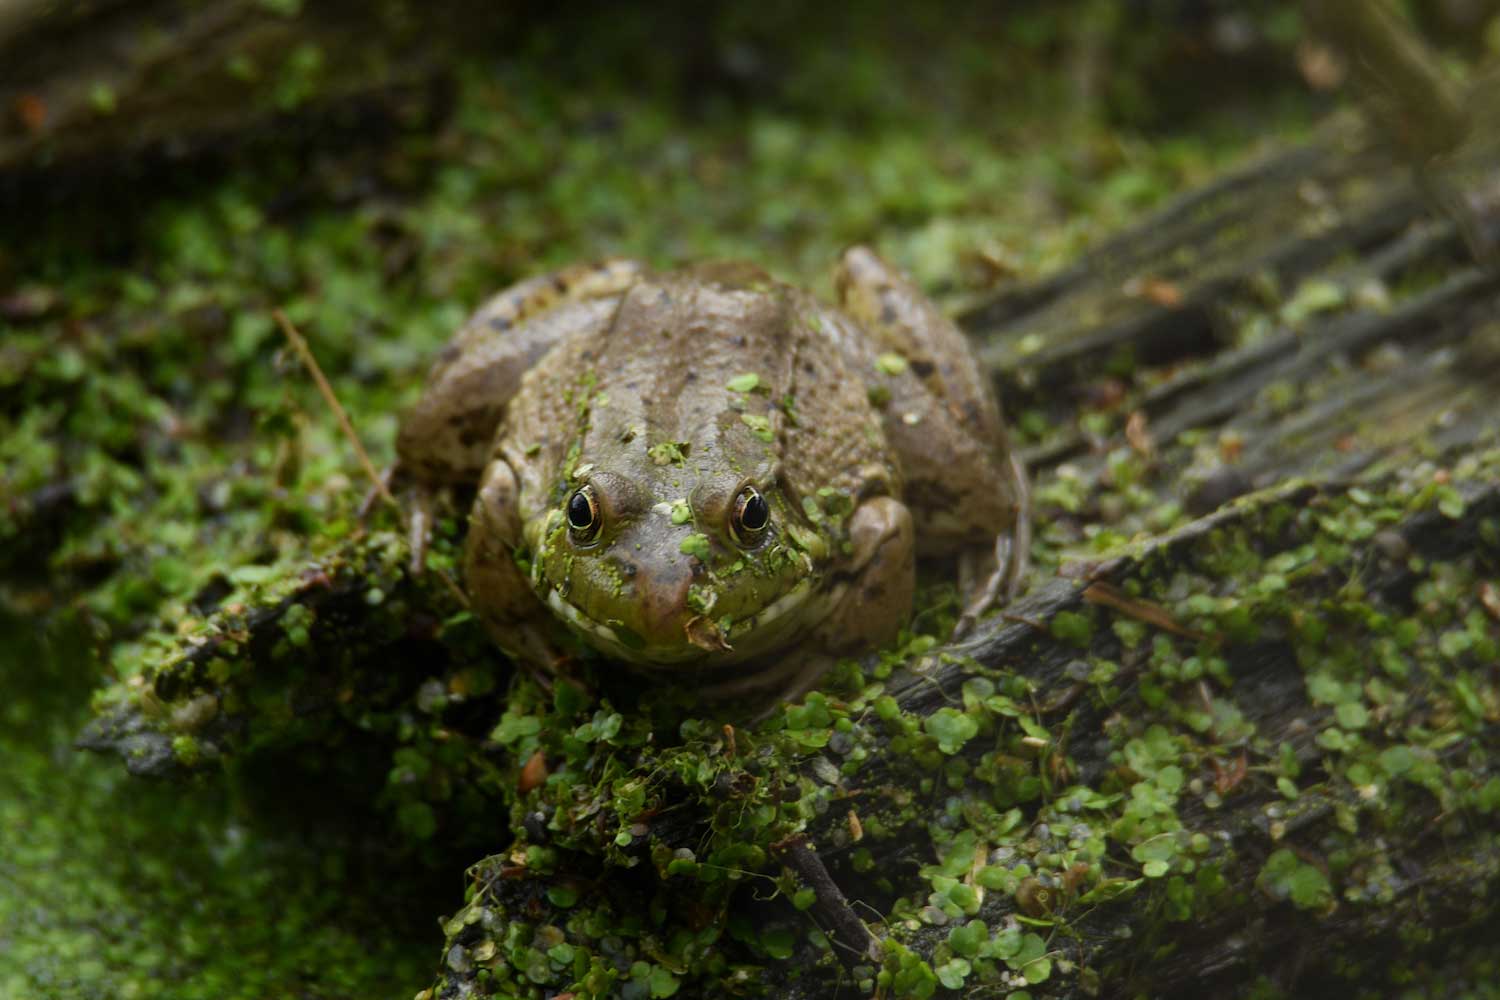 A bullfrog covered in duckweed sitting on a log.